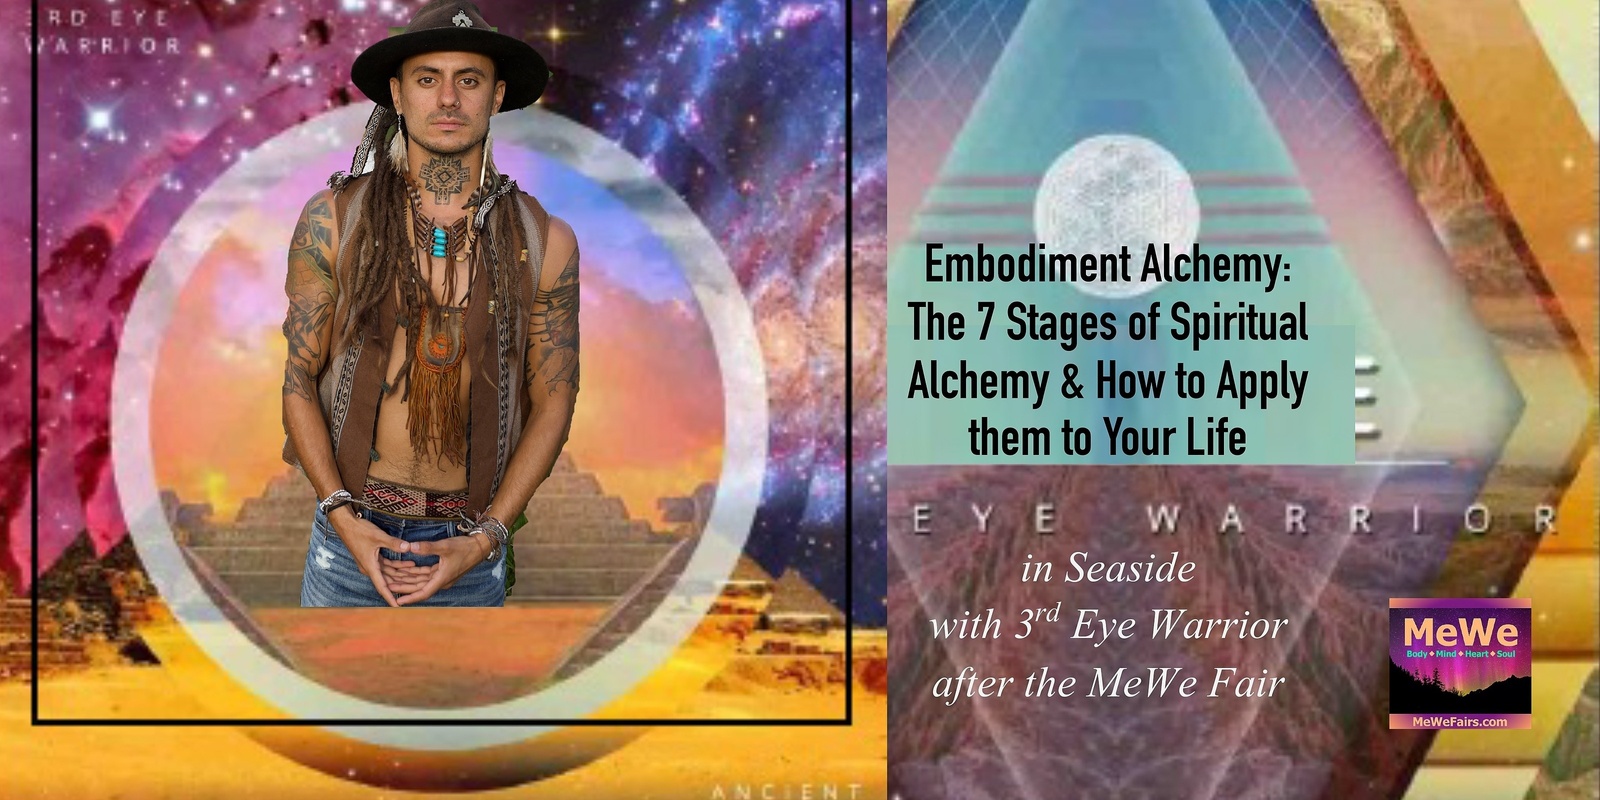 Banner image for Embodiment Alchemy: The 7 Stages of Spiritual Alchemy & How to Apply them to Your Life with 3rd Eye Warrior After the MeWe Fair on 7-6-24